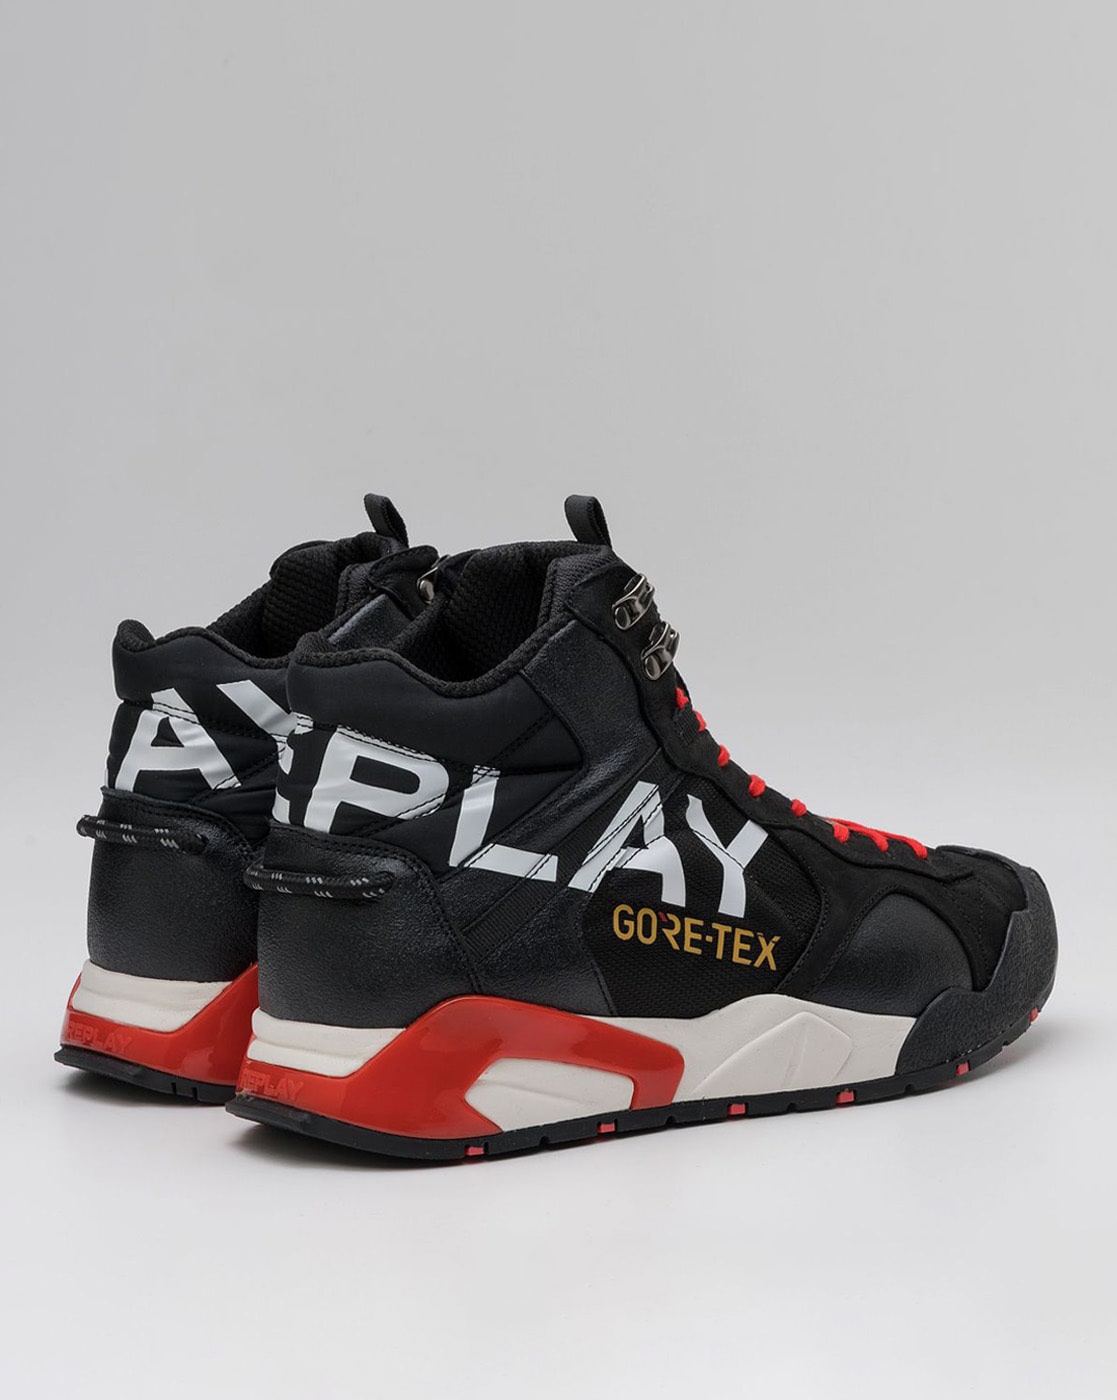 REPLAY ® Clothing and Footwear Online Store: Buy Original REPLAY Shoes: AJIO